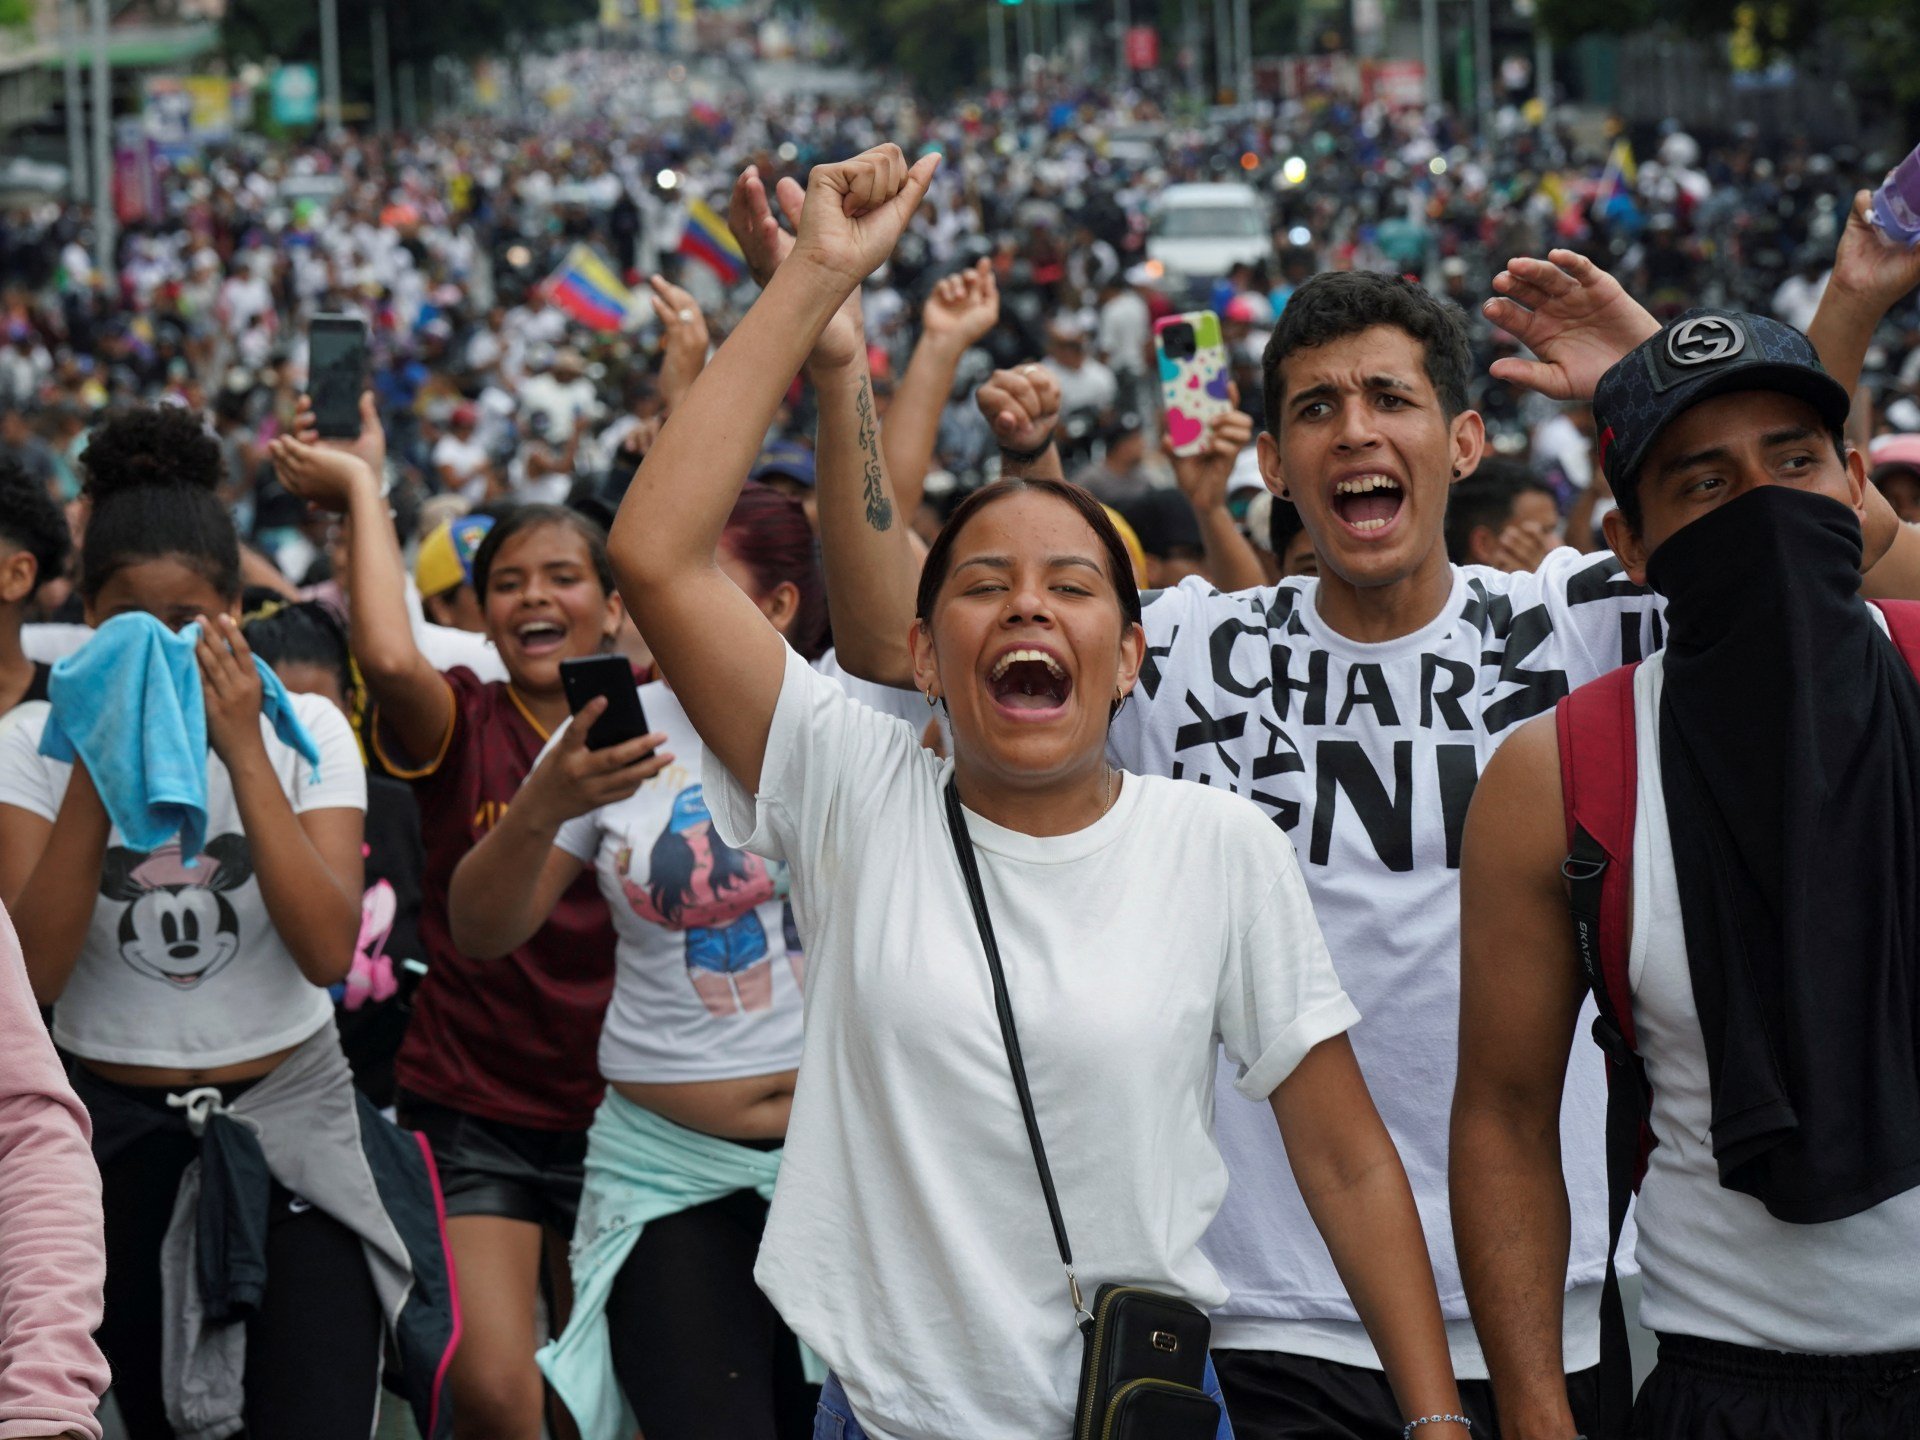 What’s happening in Venezuela? Election turmoil, protests and fraud claims